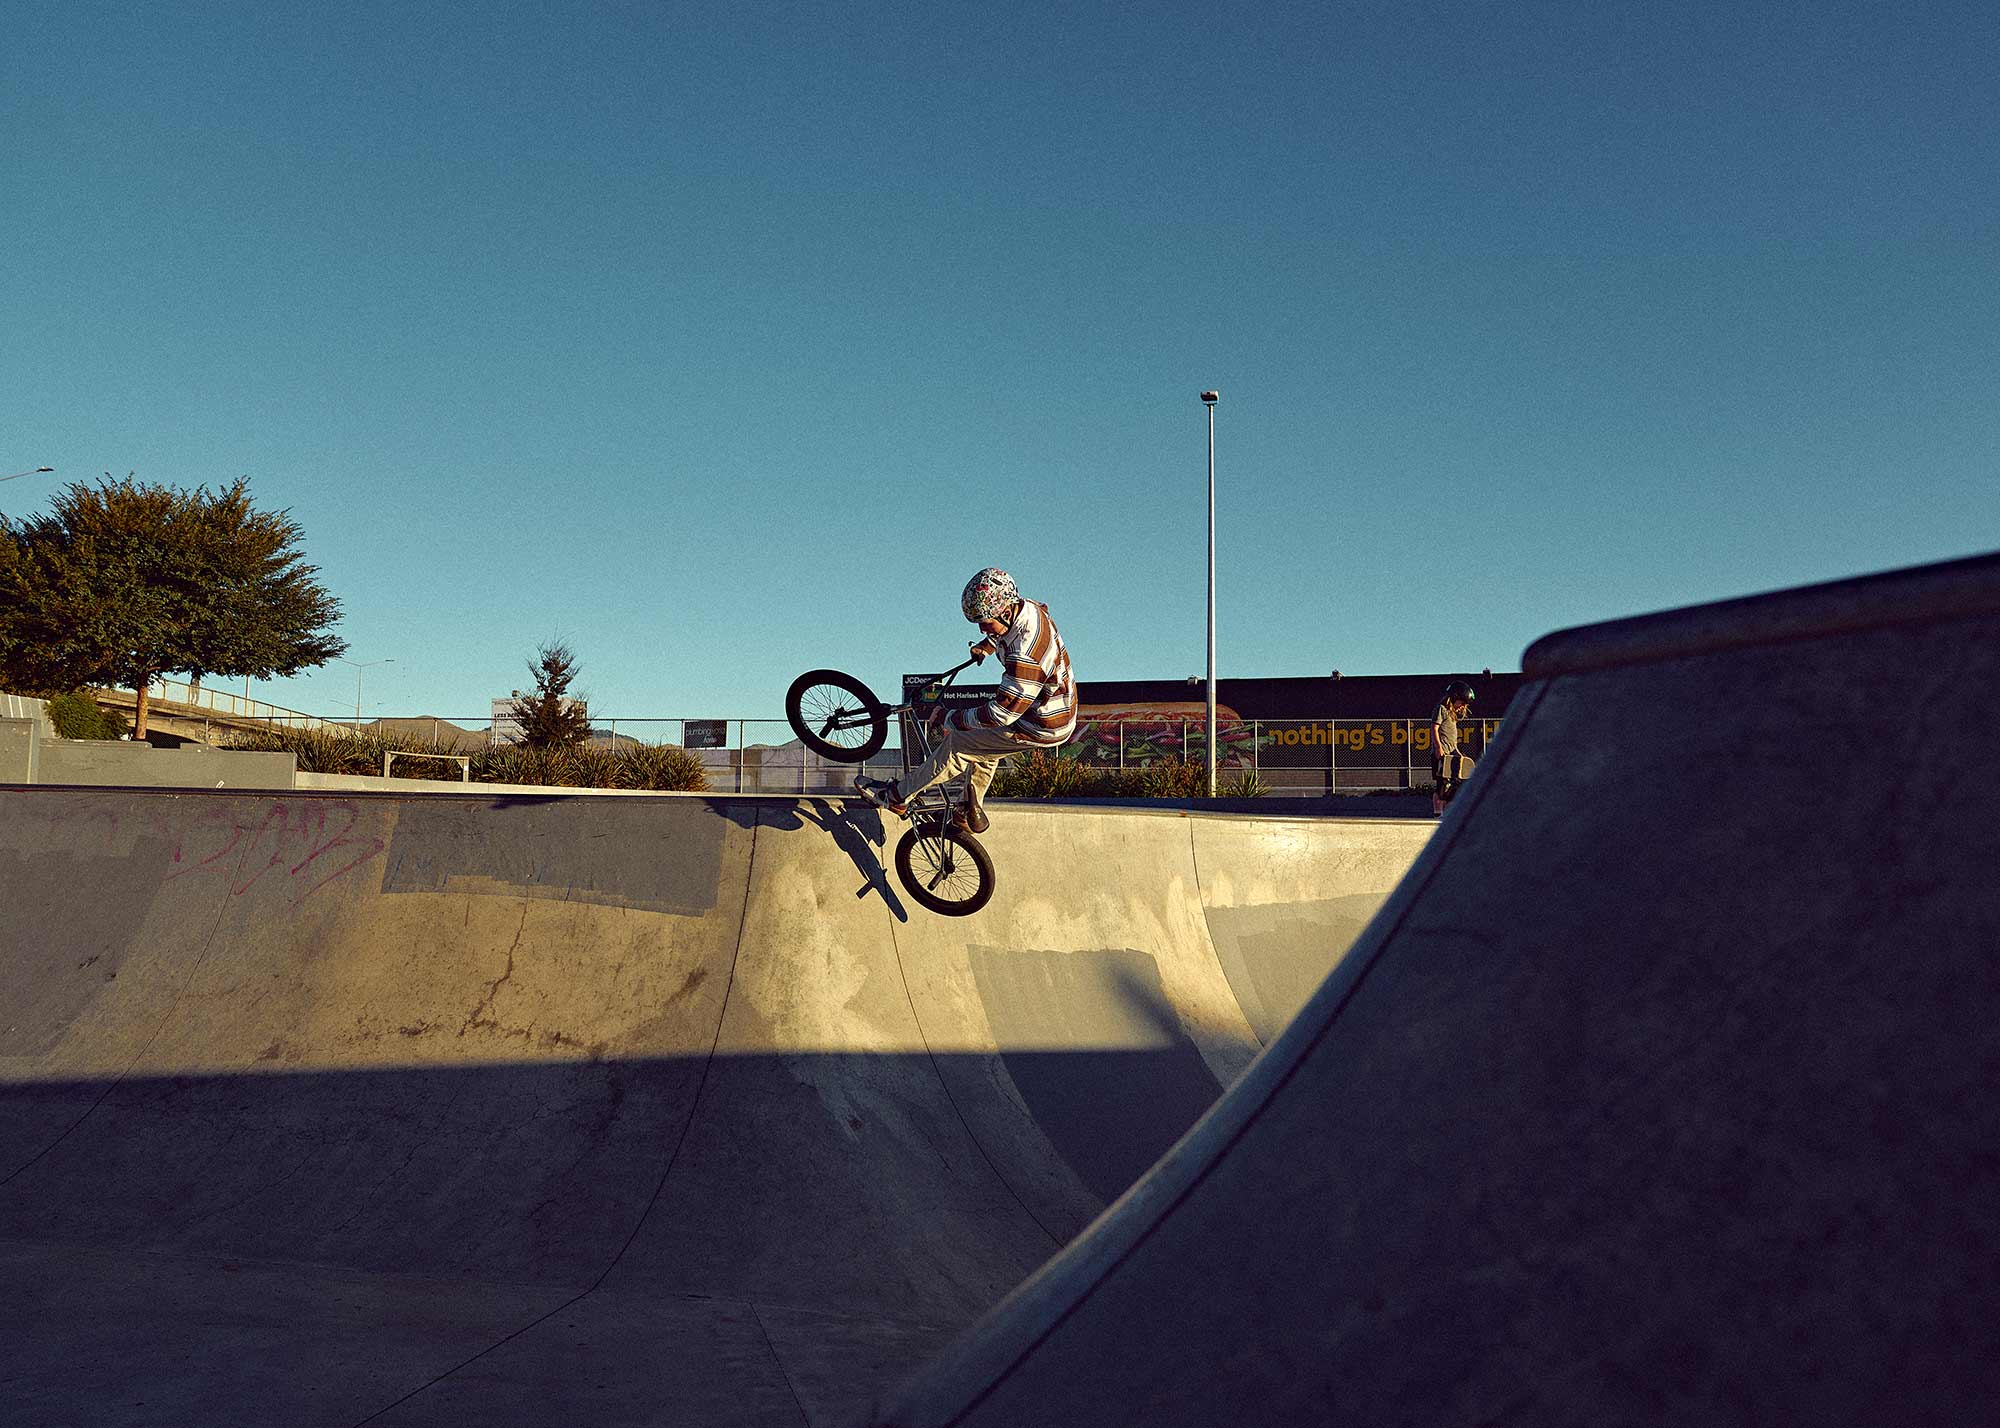 Vibrant Cycling scene at Washington Skatepark, Christchurch, showcasing a lively community of skaters and bikers